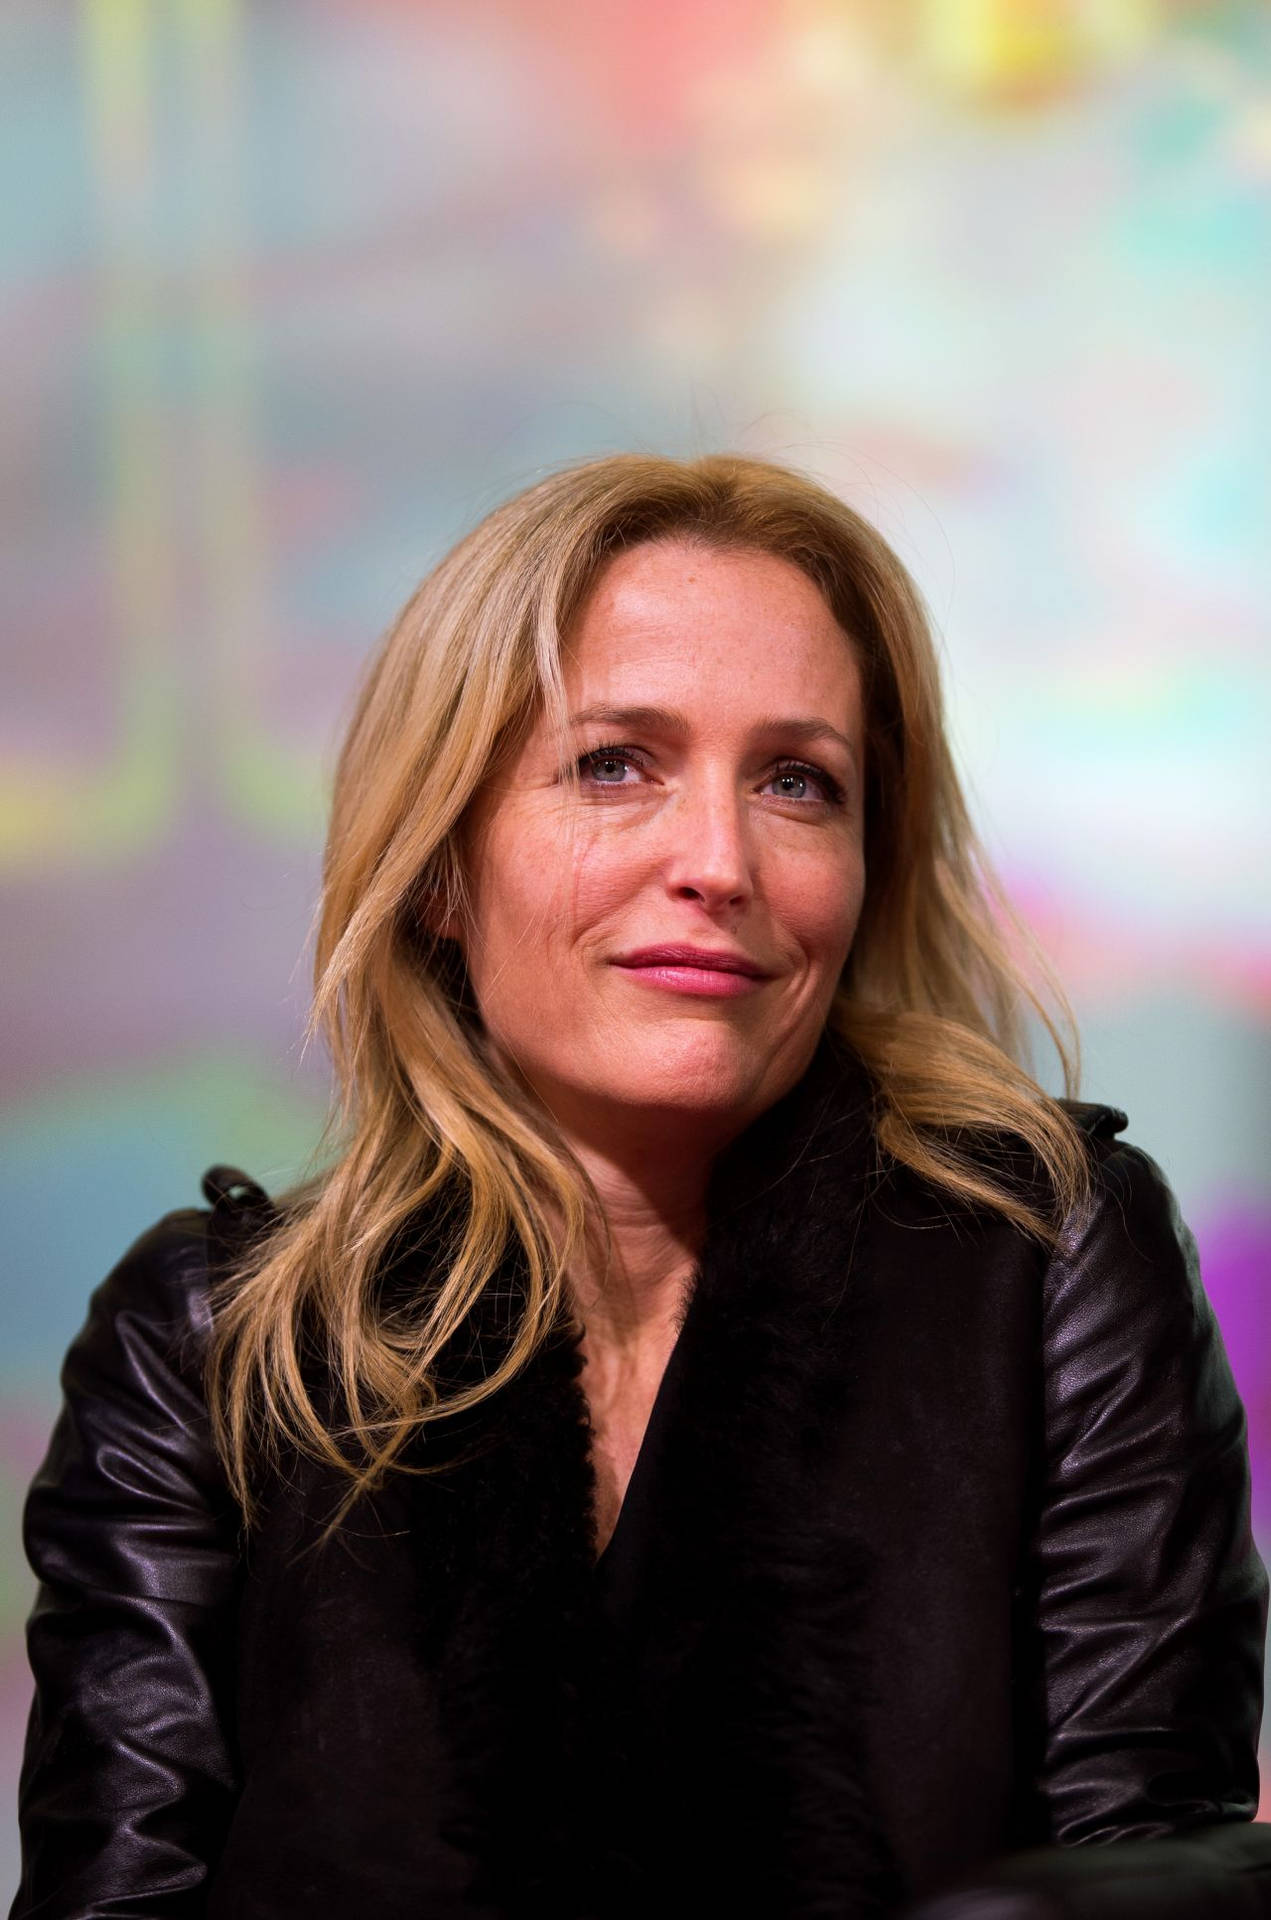 Gillian Anderson During an X-Files Meet and Greet Wallpaper